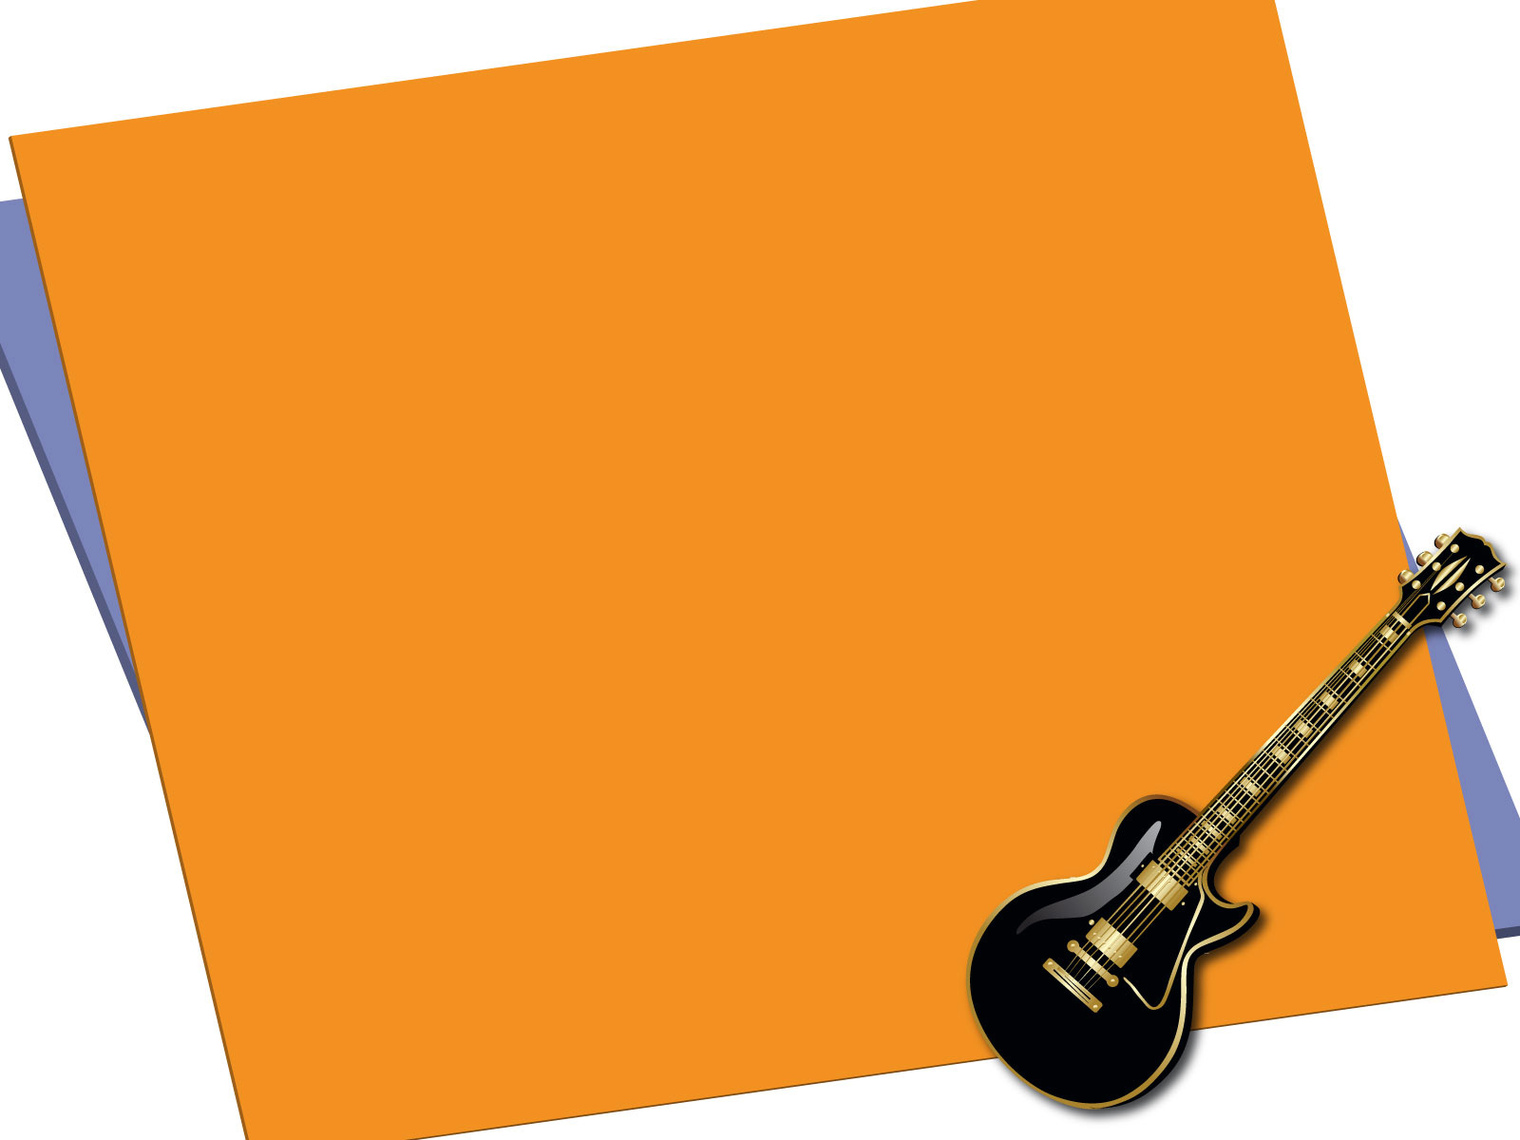 Free Guitar Backgrounds For PowerPoint Music PPT Templates Clipart ...